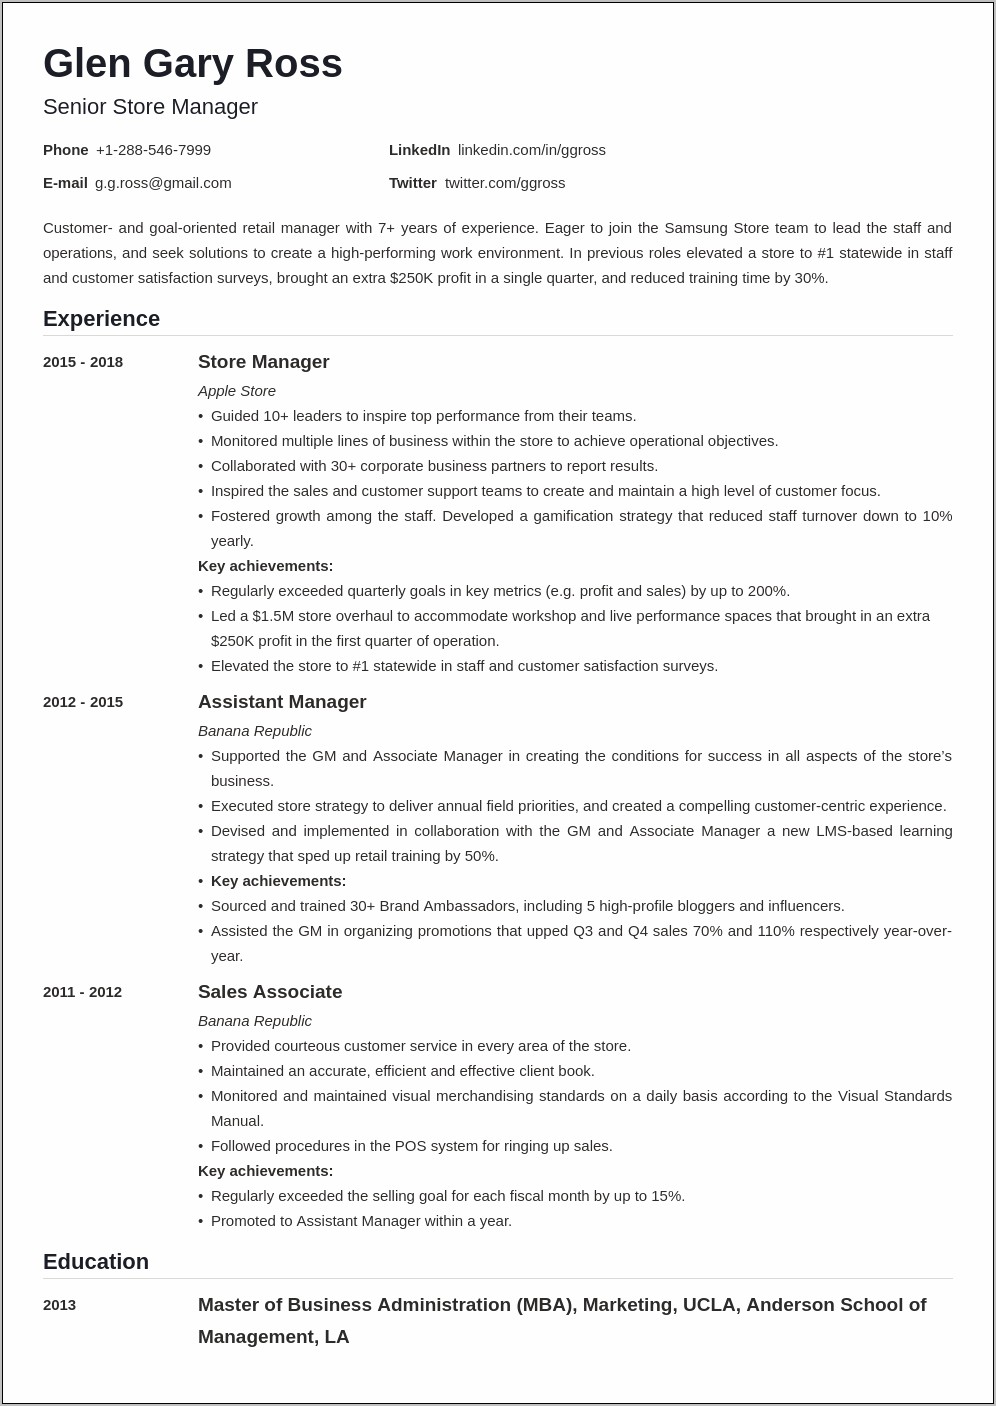 Sample Resume For A Retail Position